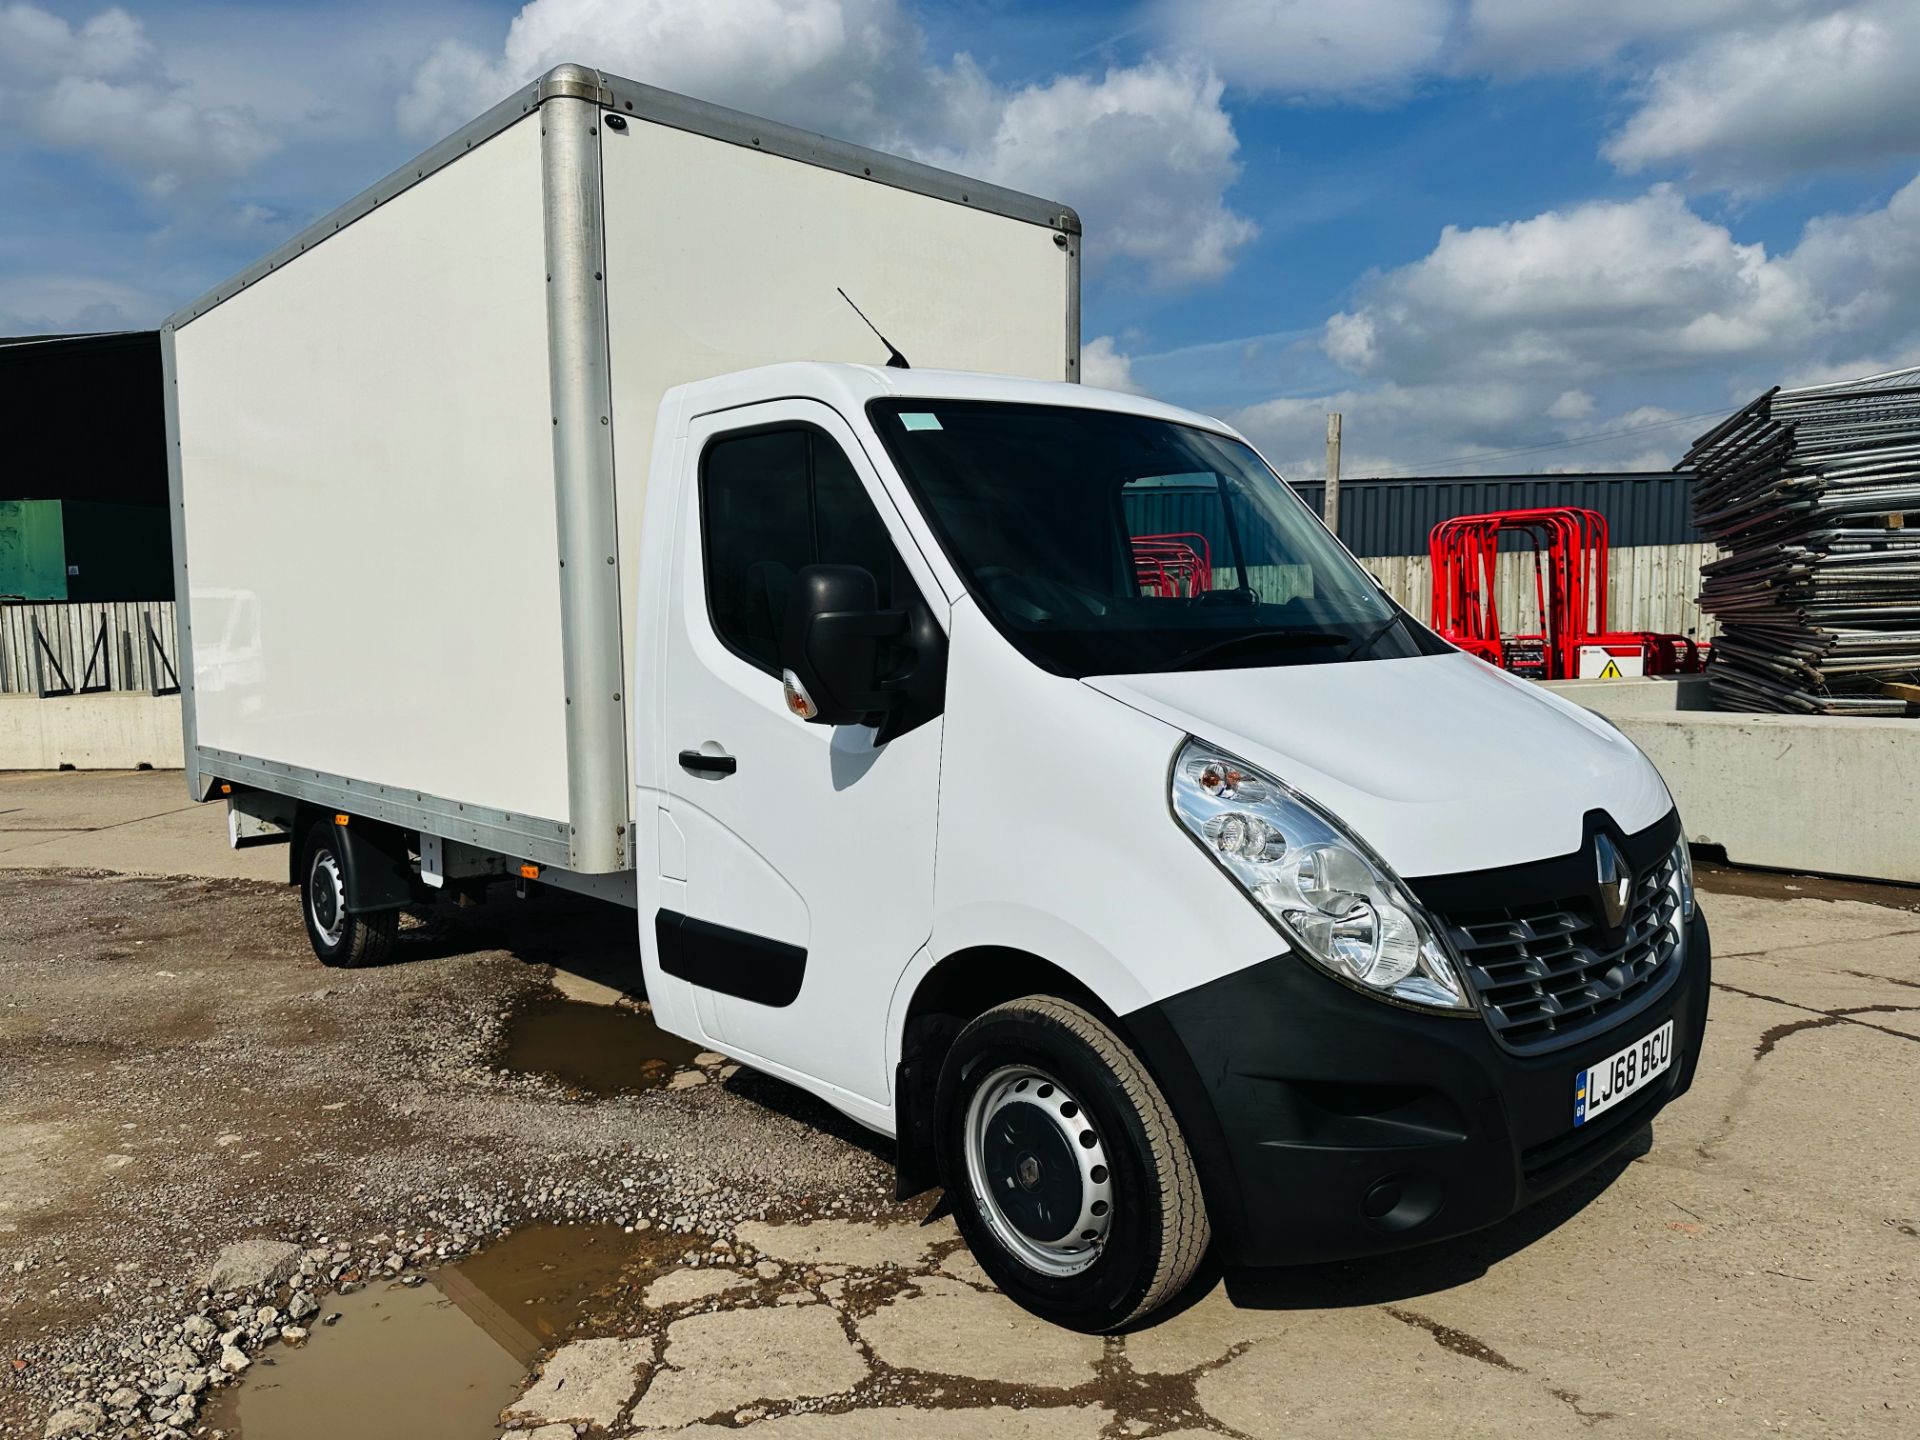 Renault Master 2.3 DCI 130 Business Edition Lwb (Luton / Box Van) - 2019 Model - Euro 6 - Tail Lift - Image 2 of 27